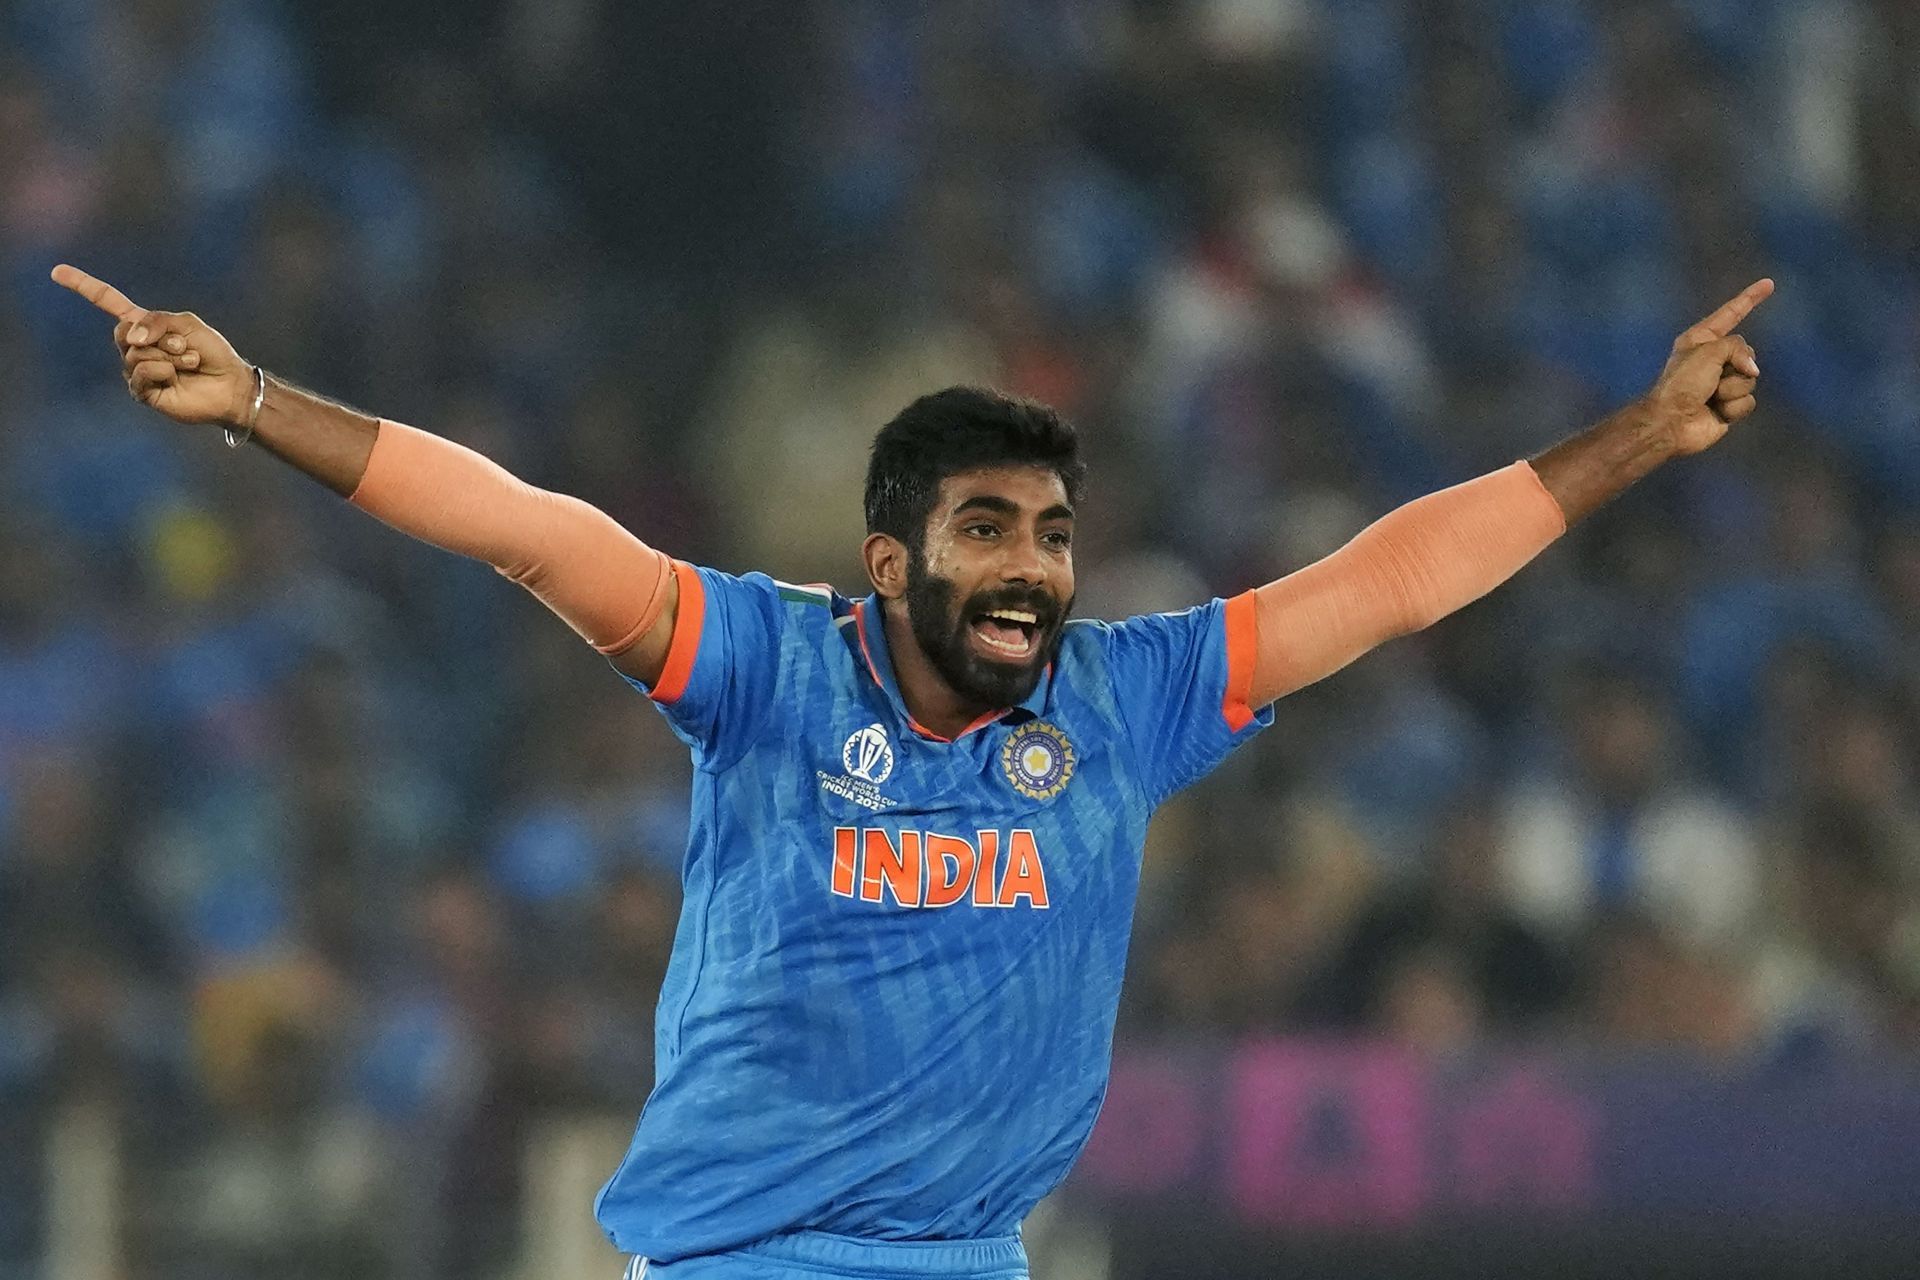 Jasprit Bumrah dismissed Mitchell Marsh and Steve Smith with the new ball. [P/C: AP]